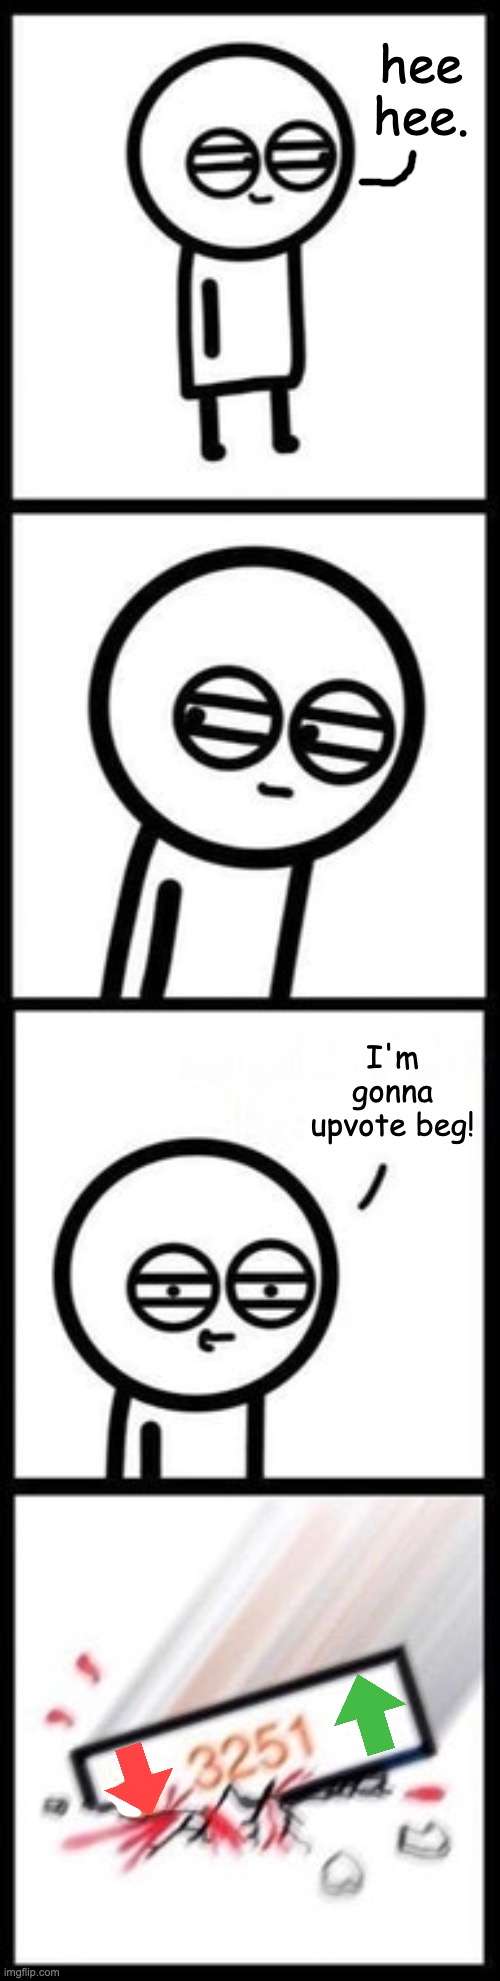 Boy, I'm gonna get hate for this, maybe. | hee hee. I'm gonna upvote beg! | image tagged in 3251 upvotes,upvote beggars,smash,downvote,meanwhile on imgflip,dumb meme | made w/ Imgflip meme maker